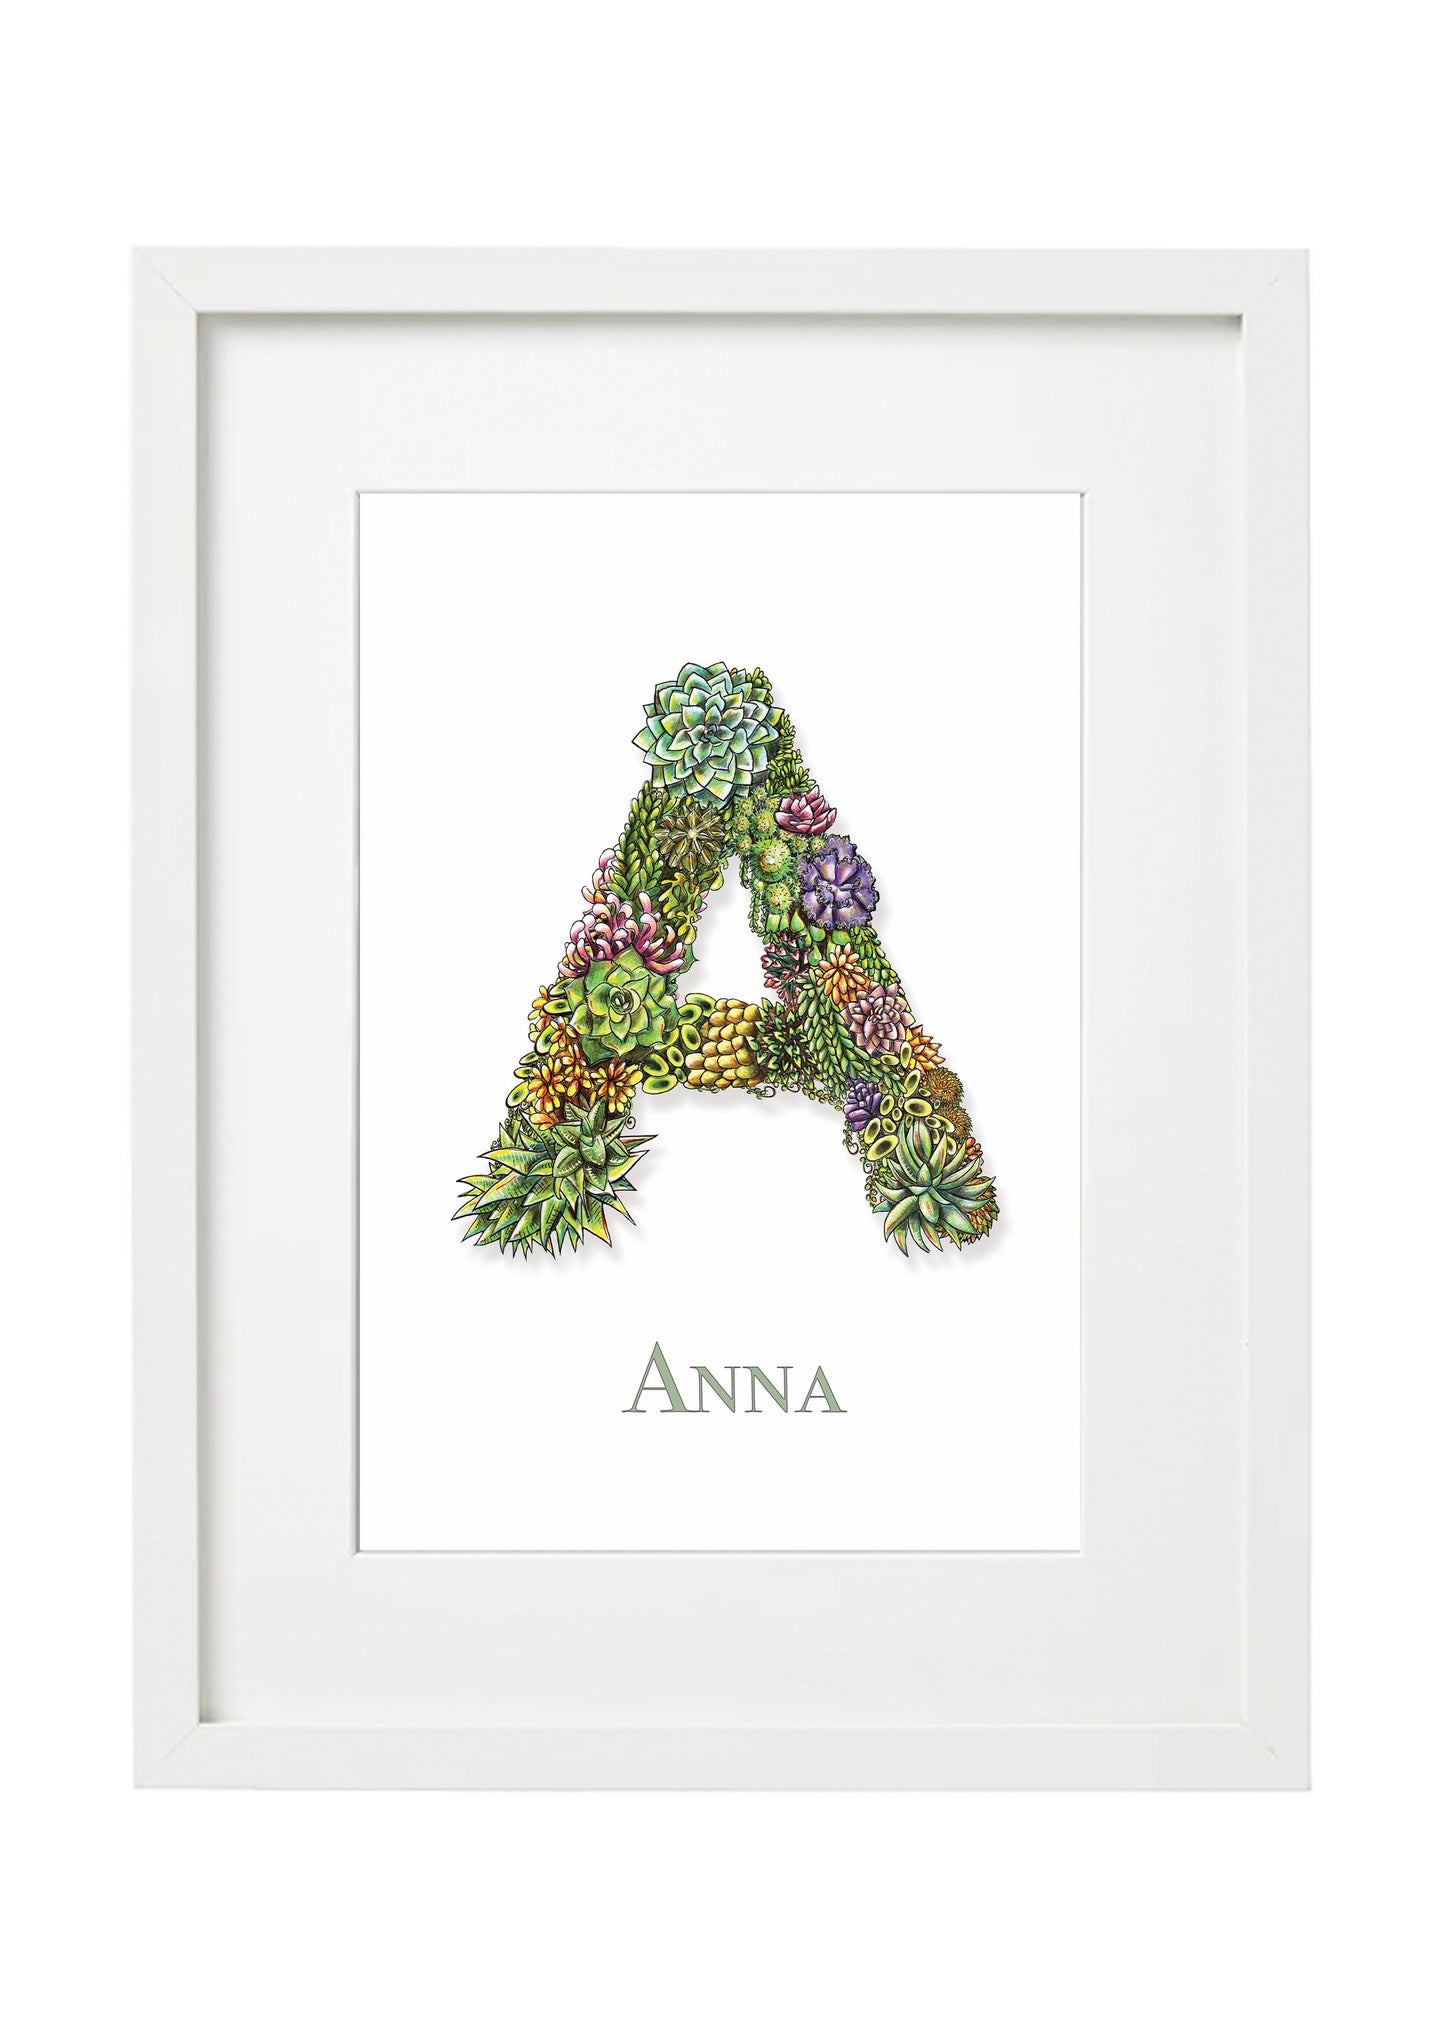 Personalised Name Alphabet Print Lucy Hughes Creations 